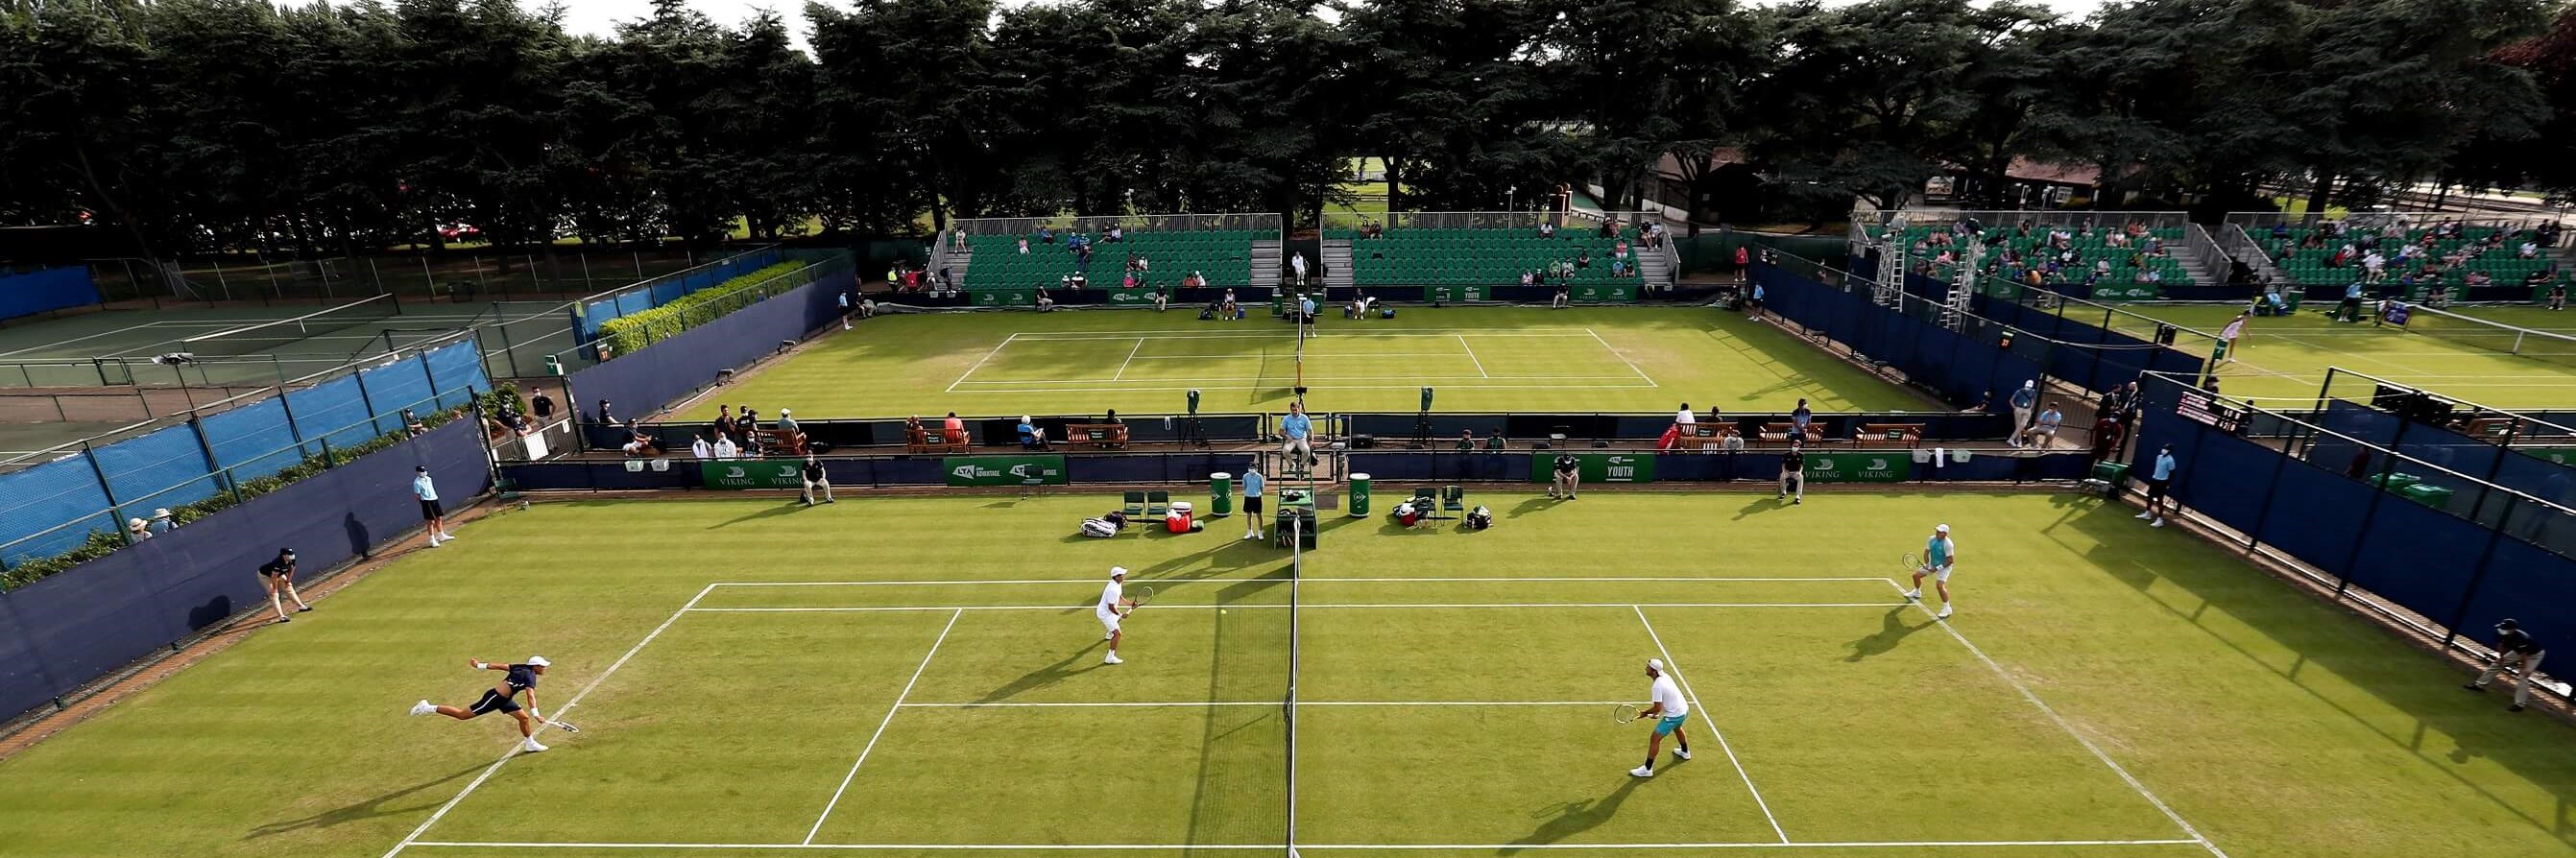  A general view of play in the doubles match  at Nottingham Tennis Centre